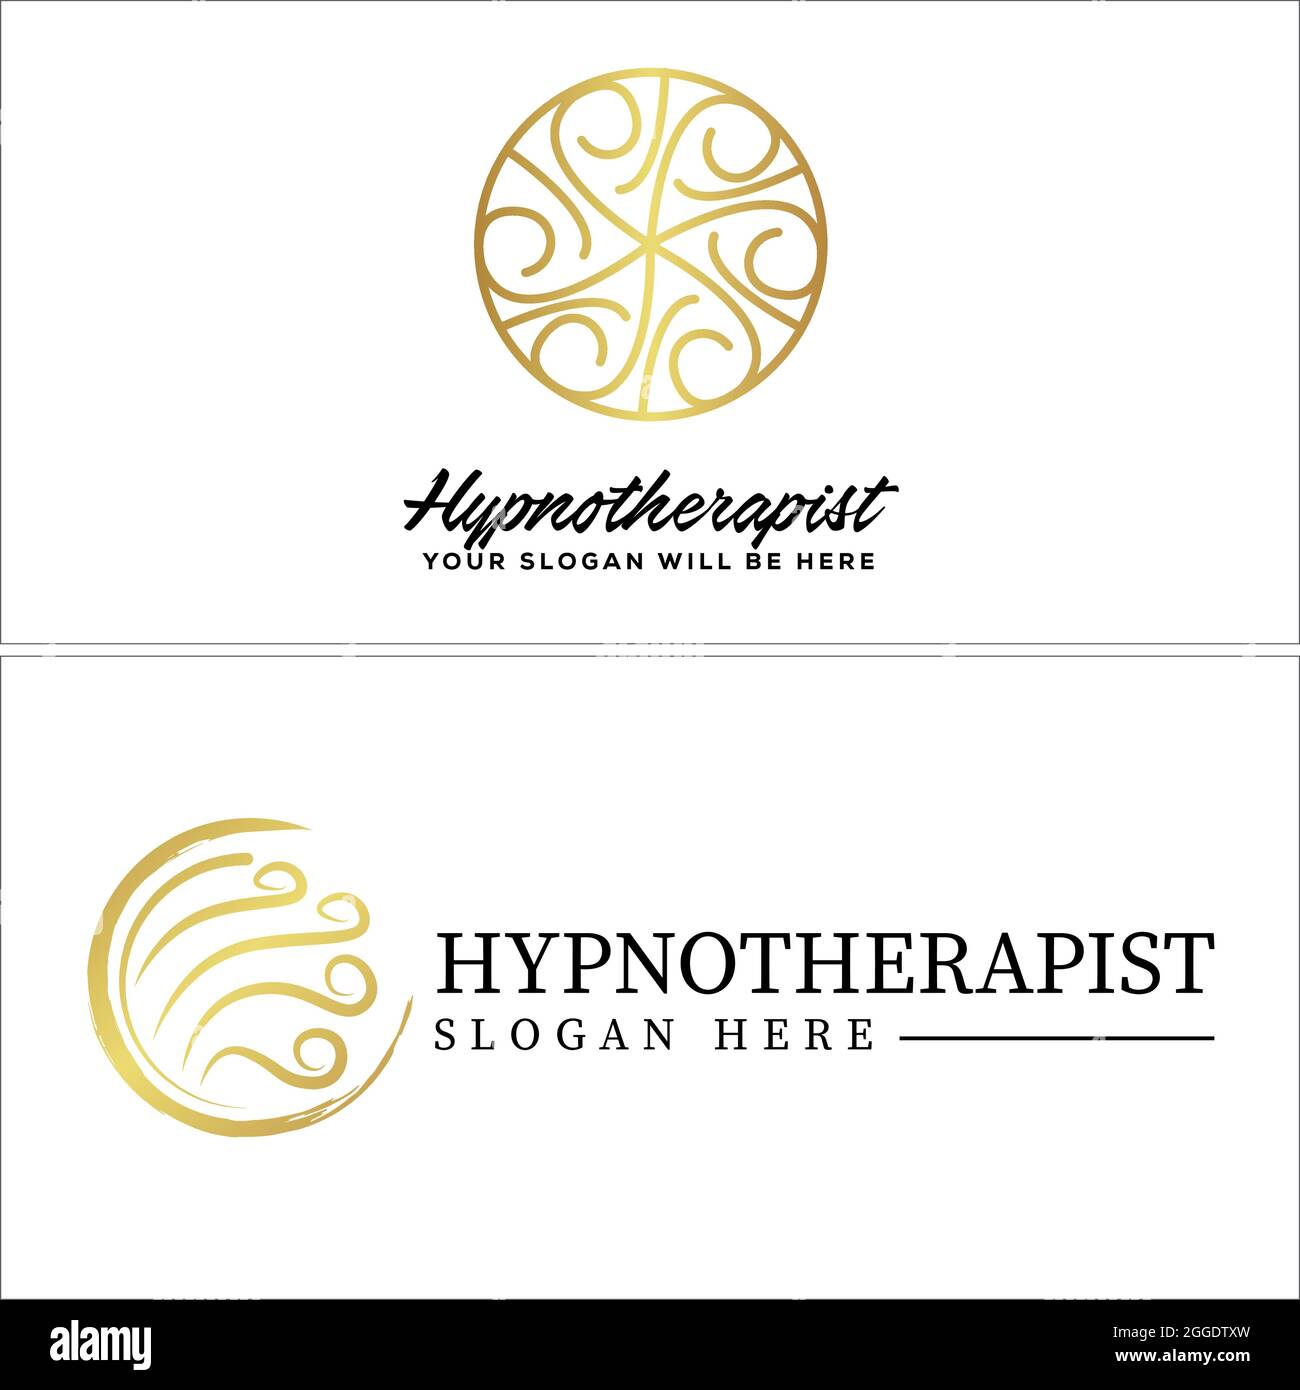 Hypnotherapist with icon gold circle leaf icon symbol luxury logo Stock Vector